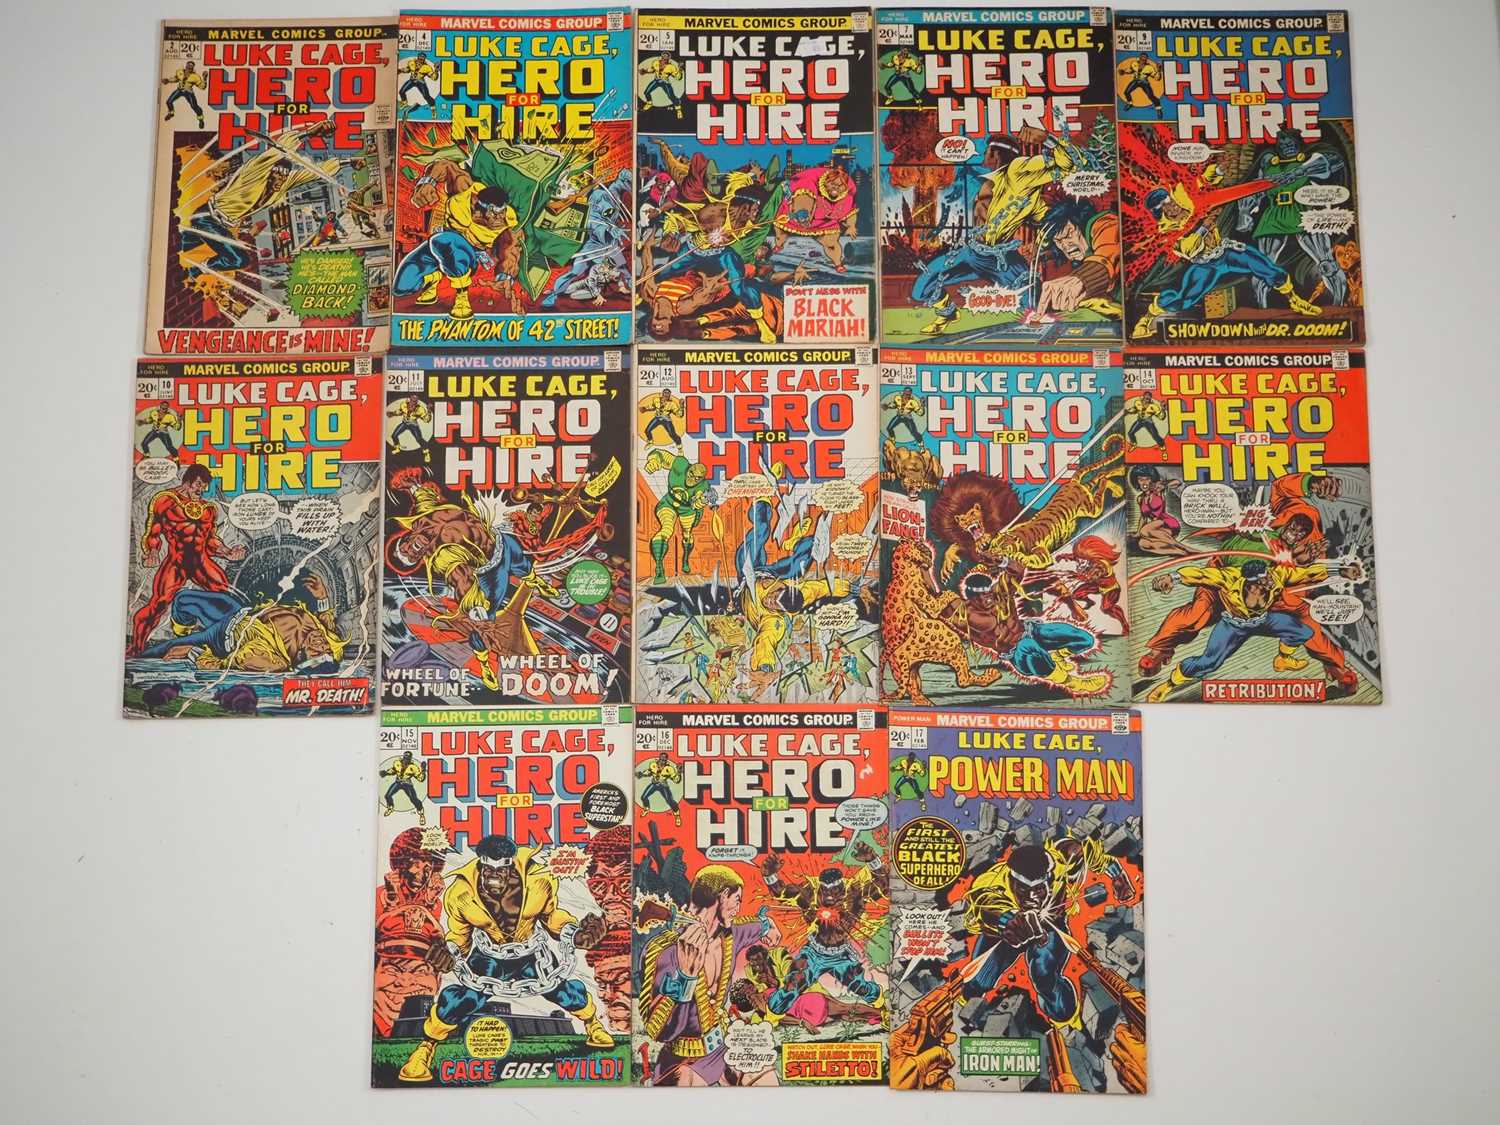 LUKE CAGE, HERO FOR HIRE #2, 4, 5, 7, 9, 10, 11, 12, 13, 14, 15, 16, 17 (13 in Lot) - (1972/1974 -